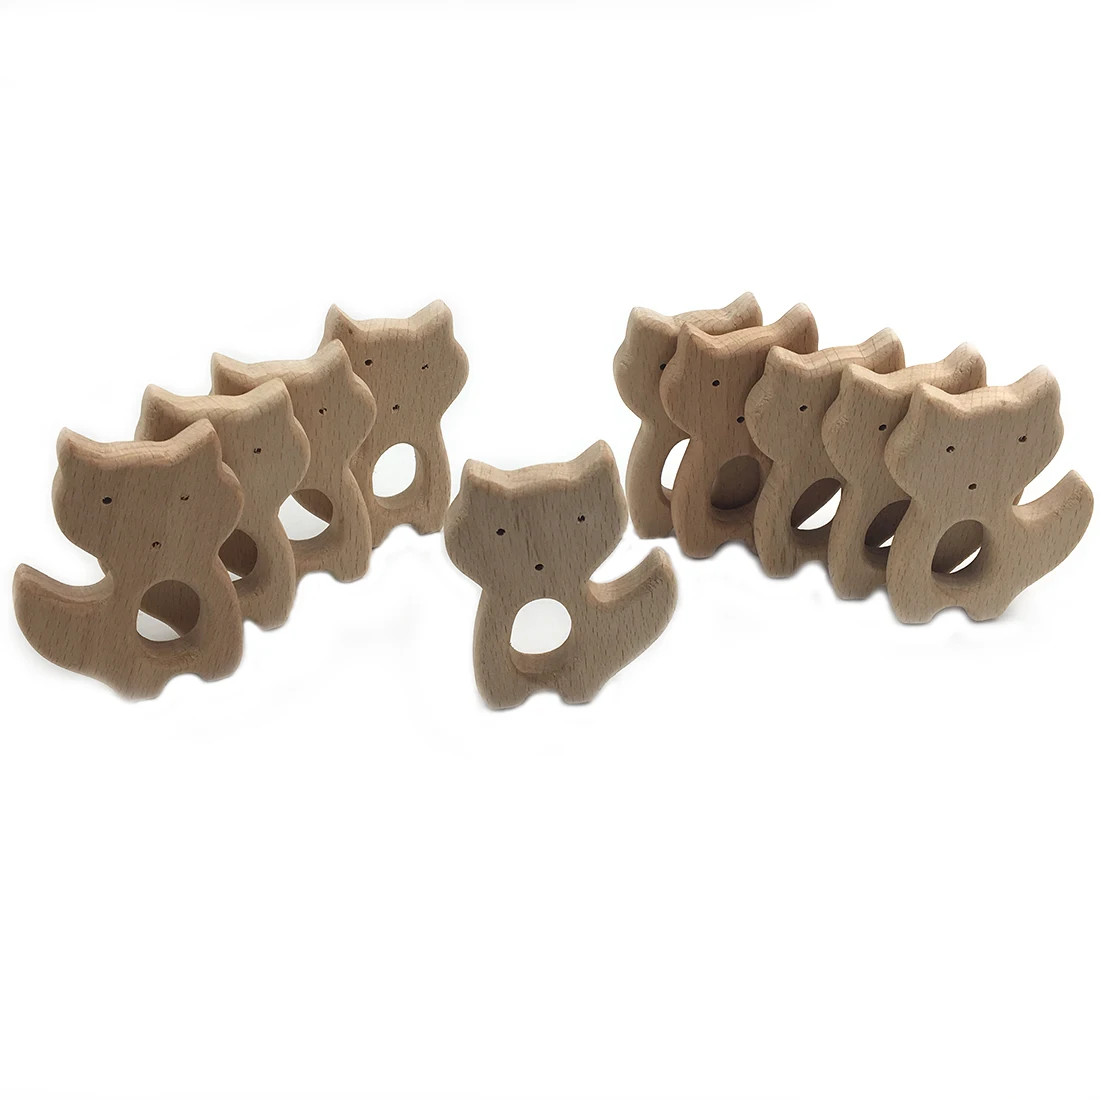 New 10pcs Fox Shaped Baby Wooden Teether Toys Beech Pendants Teething Care Hand Carved Animal Pacifiers Education DIY Toy Gift